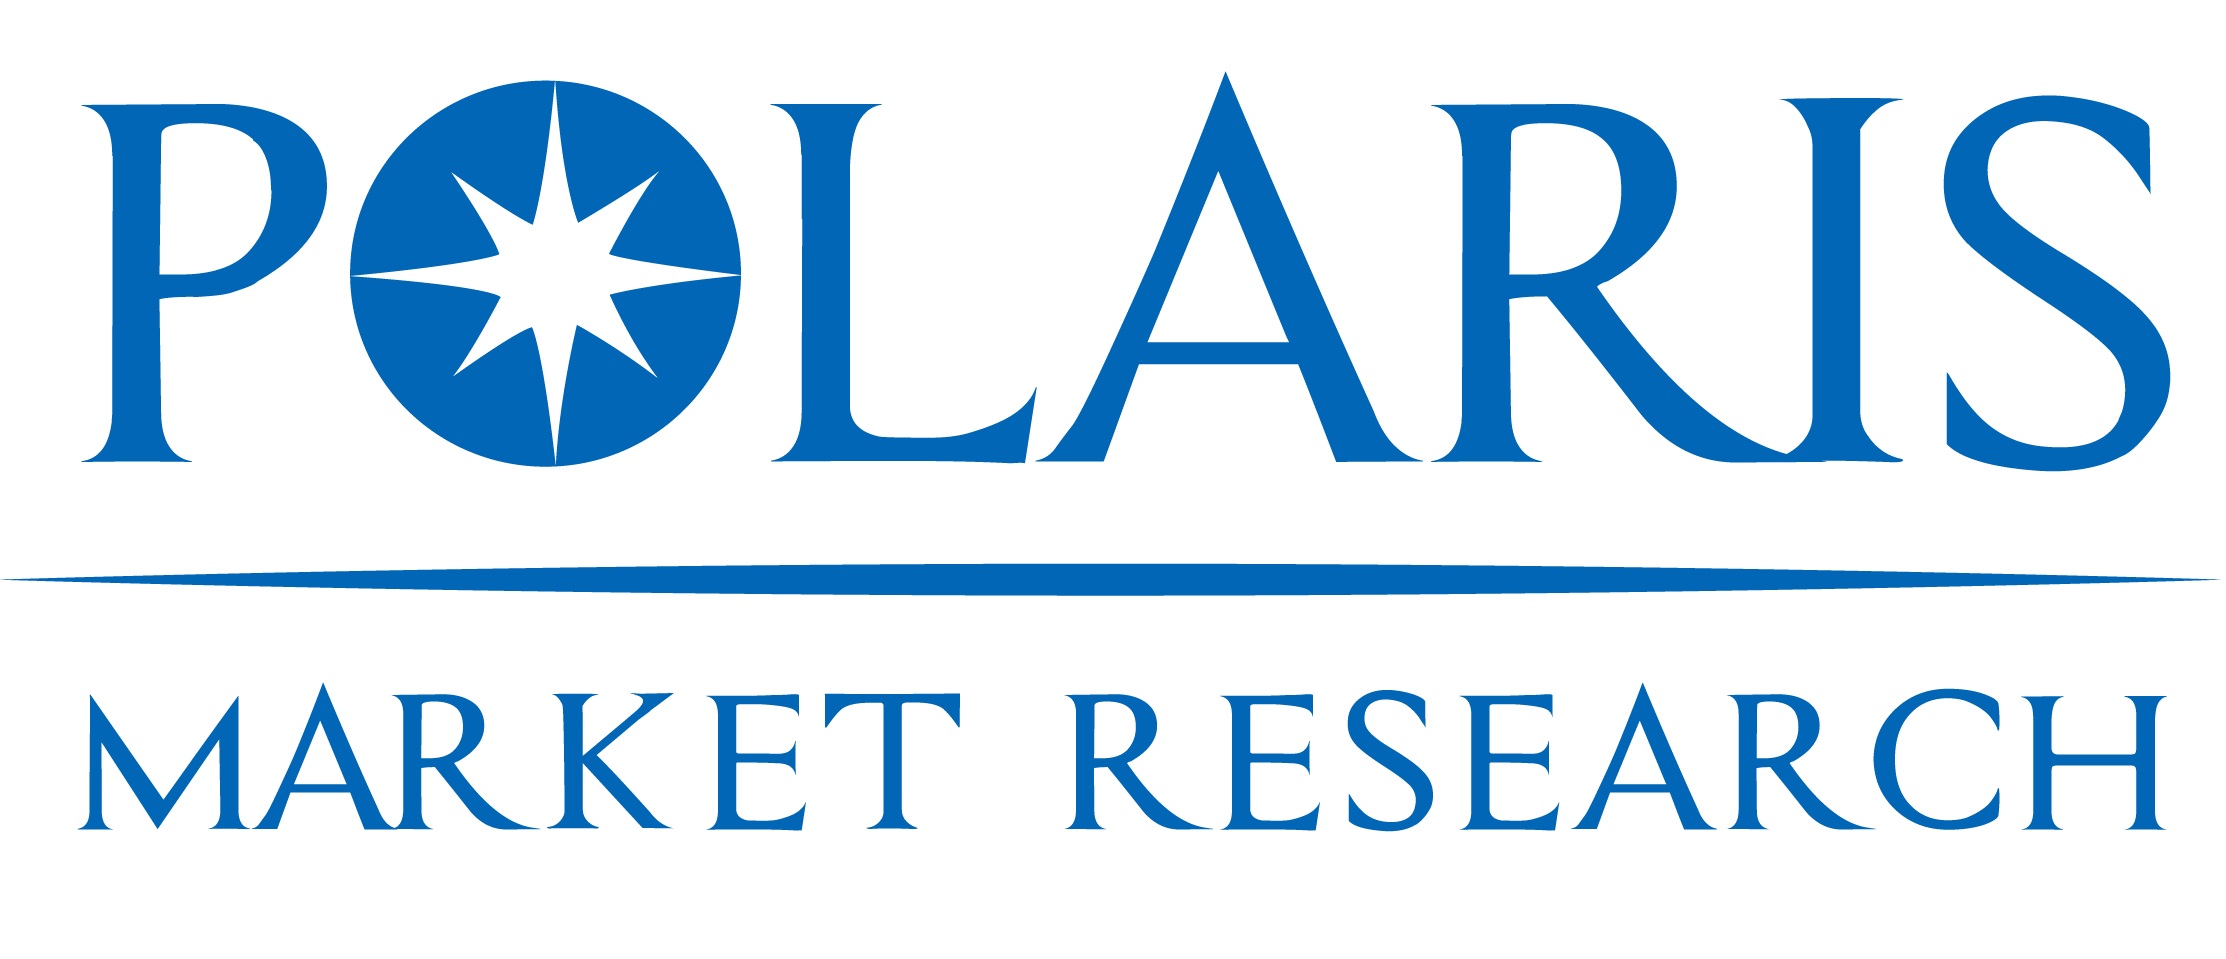 Cloud Computing Market Size & Share is expected 18.0% CAGR Rise, Will Hit to $1,418.09 Billion globally by 2028 (with COVID-19 Analysis): Polaris Market Research